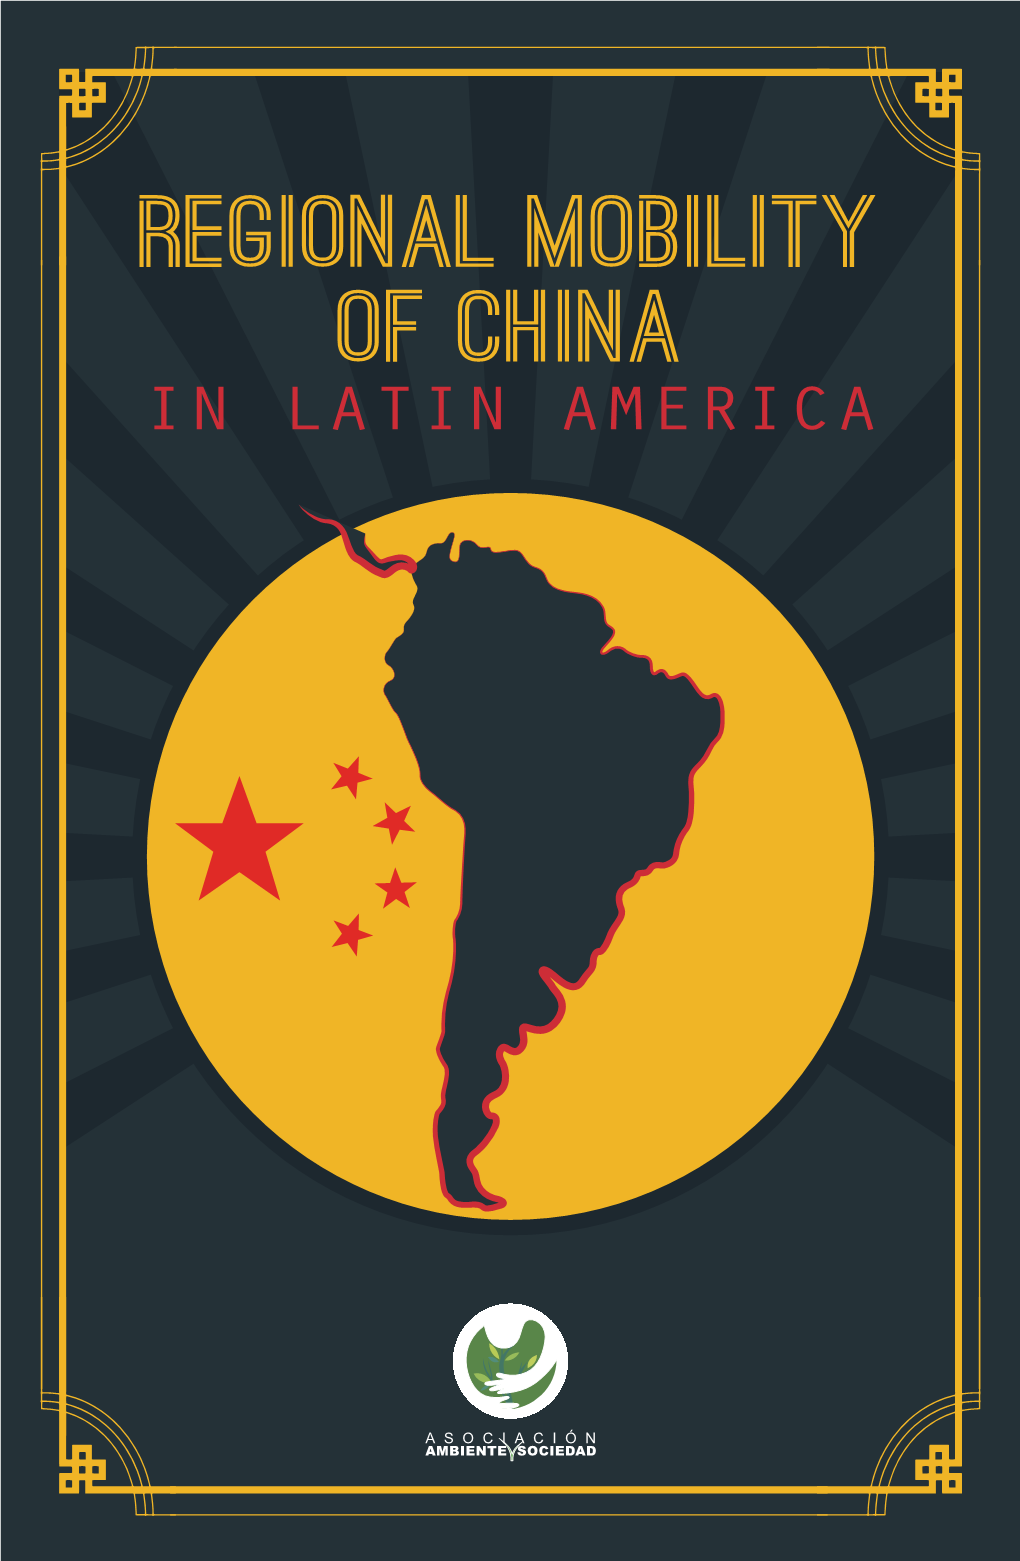 Regional Mobility of China in LATIN AMERICA